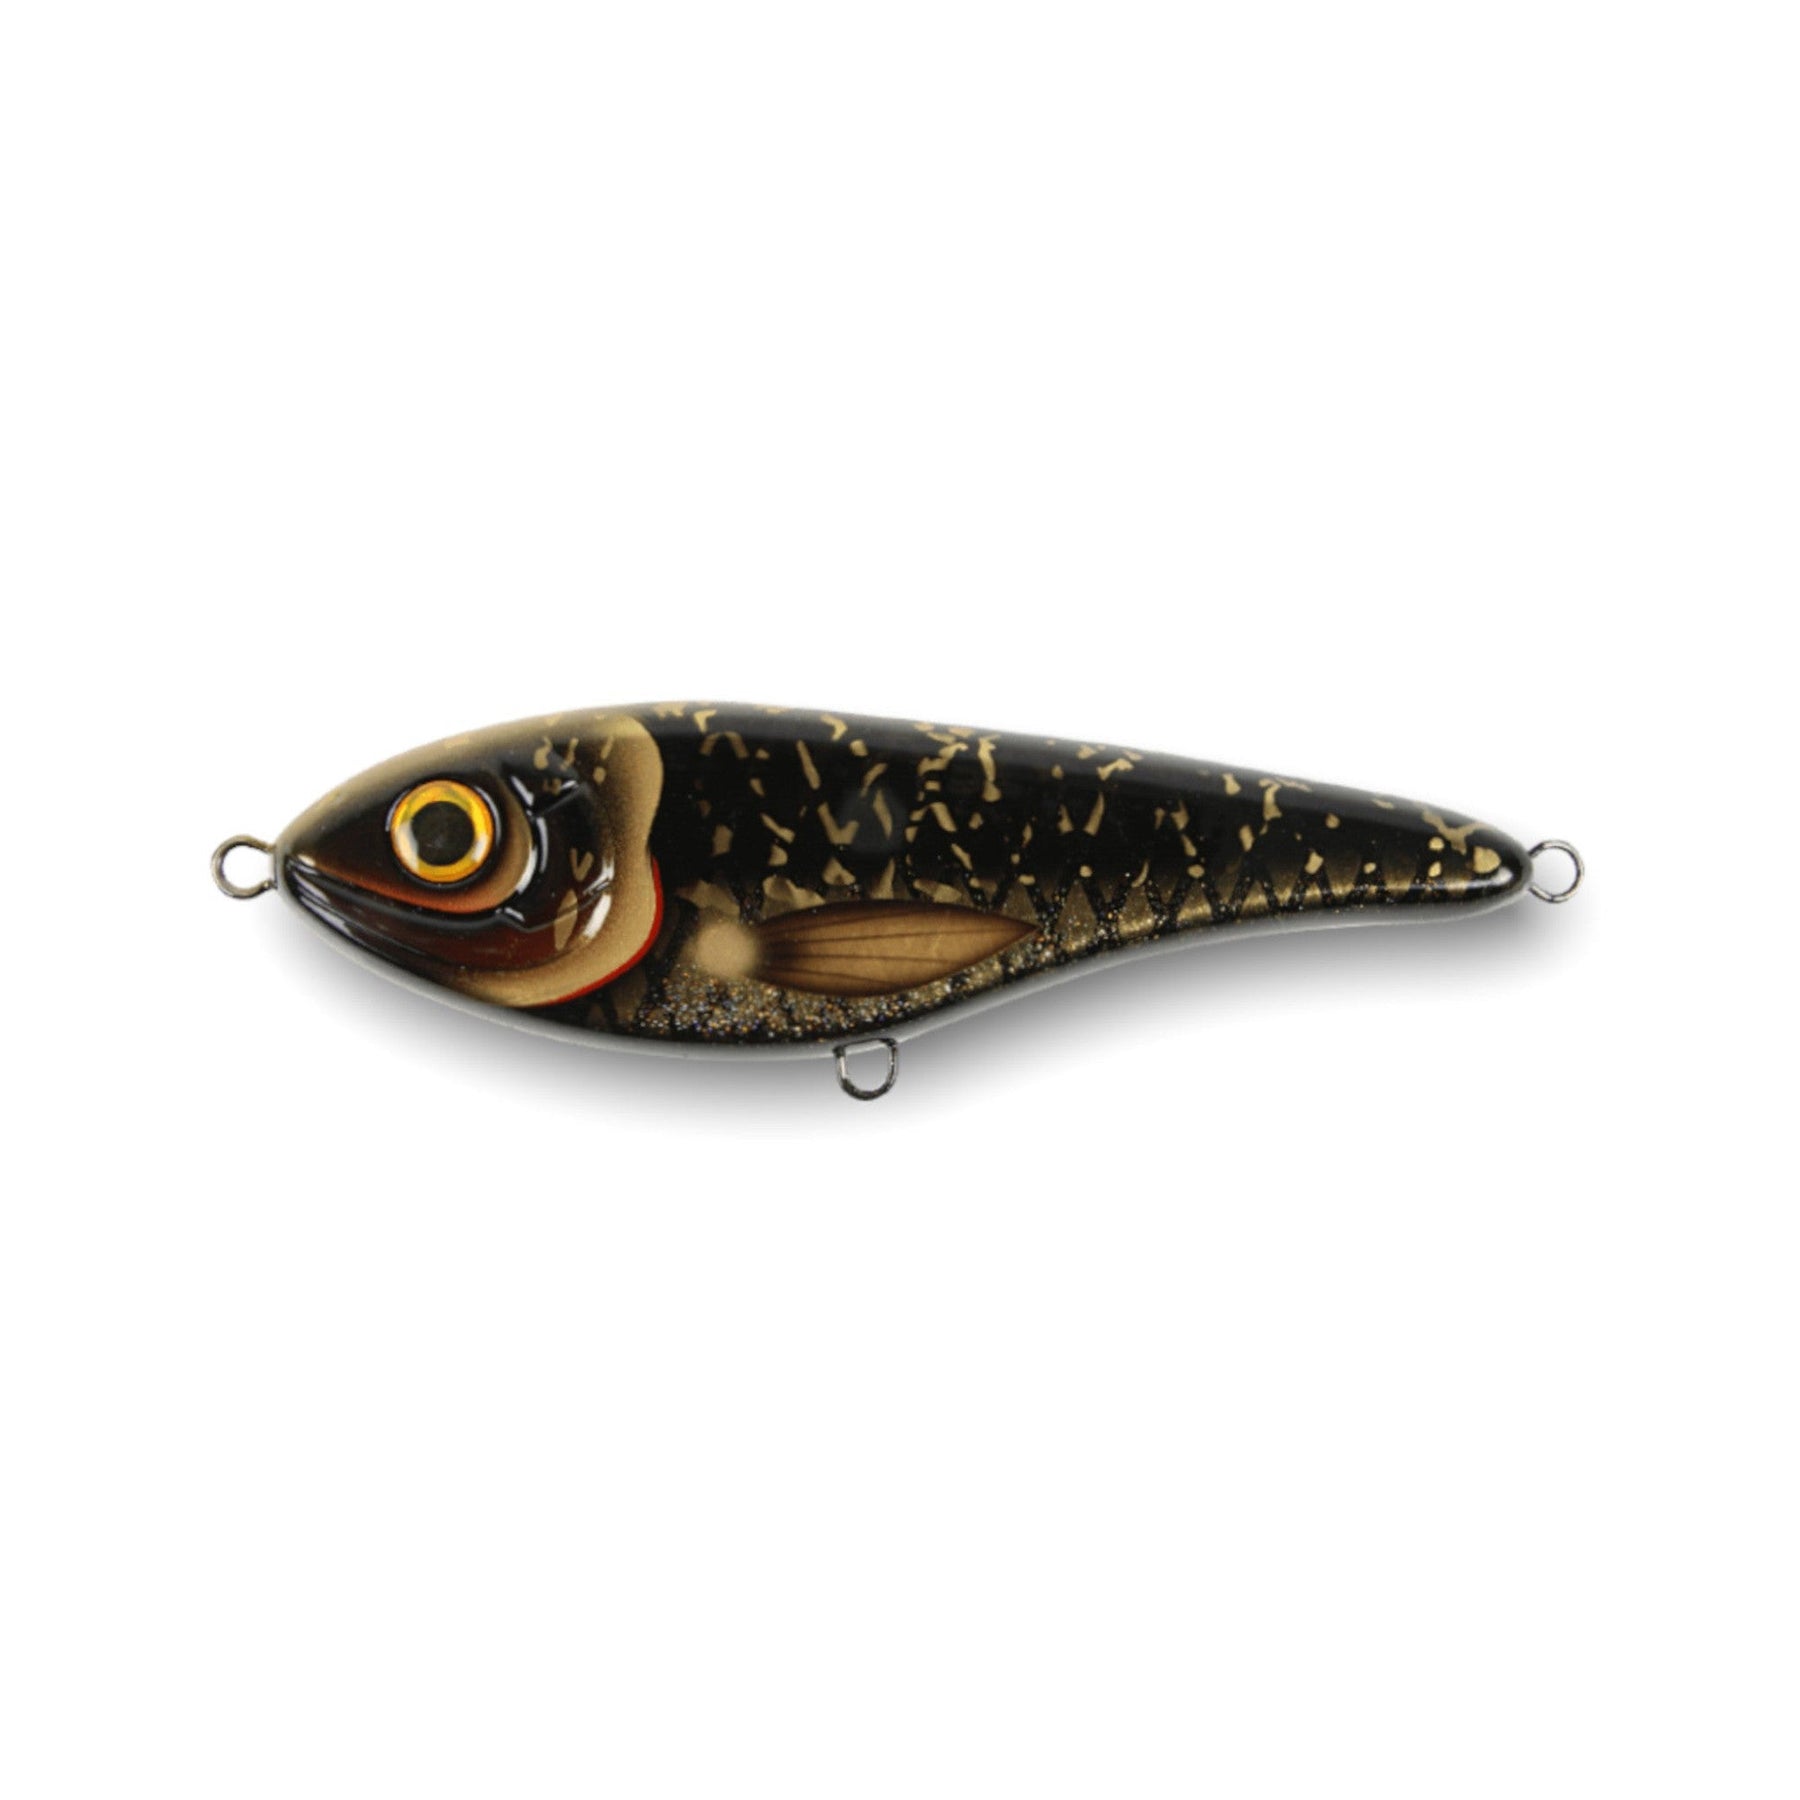 View of Jerk-Glide_Baits Strike Pro Buster Jerk II Suspending Glide Bait Black Shadow available at EZOKO Pike and Musky Shop